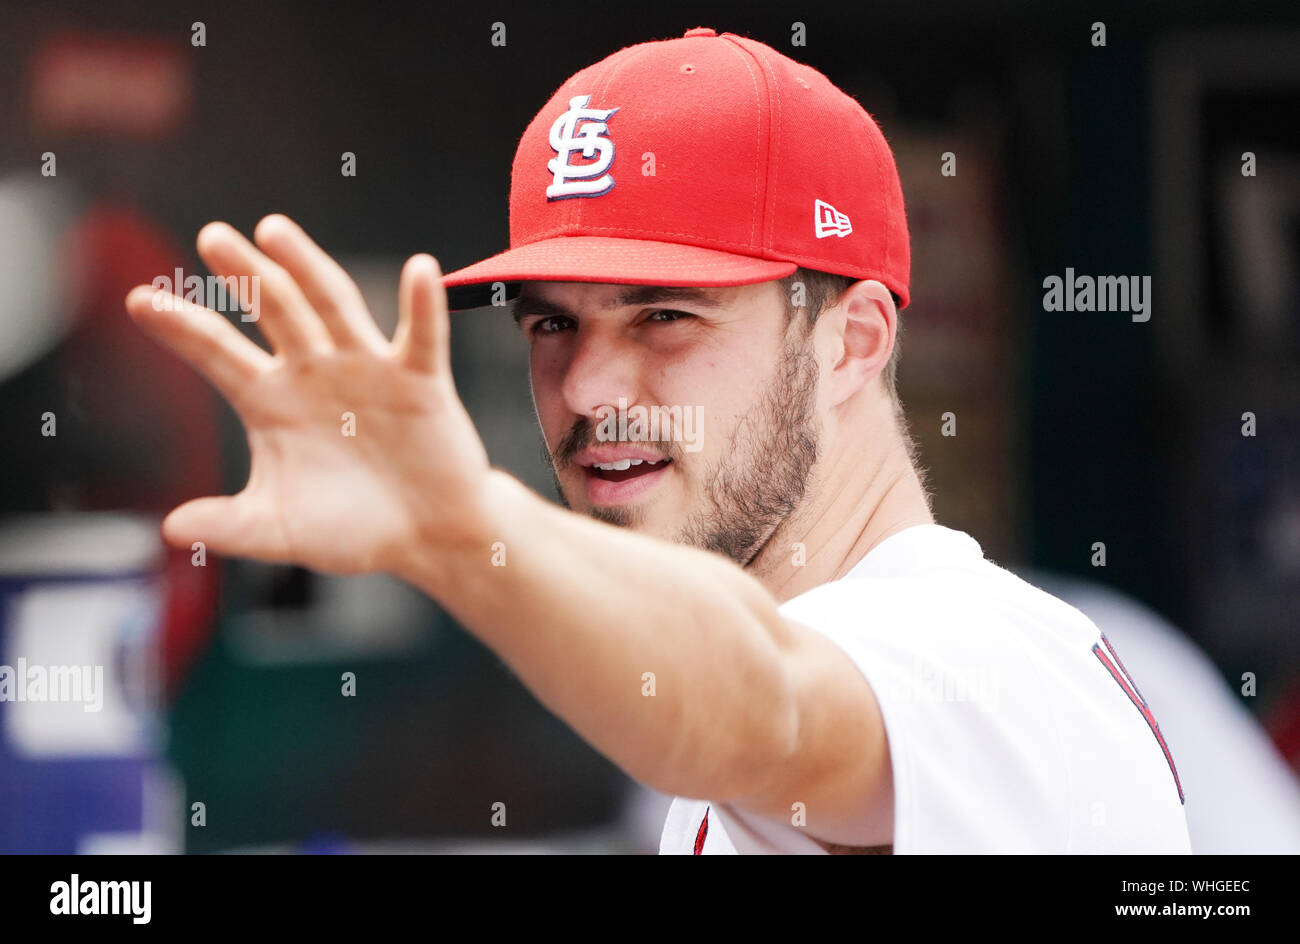 St Louis, USA. 02nd Sep, 2019. St. Louis Cardinals starting pitcher Dekota Hudson, demonstrates a technique in the dugout during a game against the San Francisco Giants at Busch Stadium in St. Louis on Monday, September 2, 2019. Photo by Bill Greenblatt/UPI Credit: UPI/Alamy Live News Stock Photo